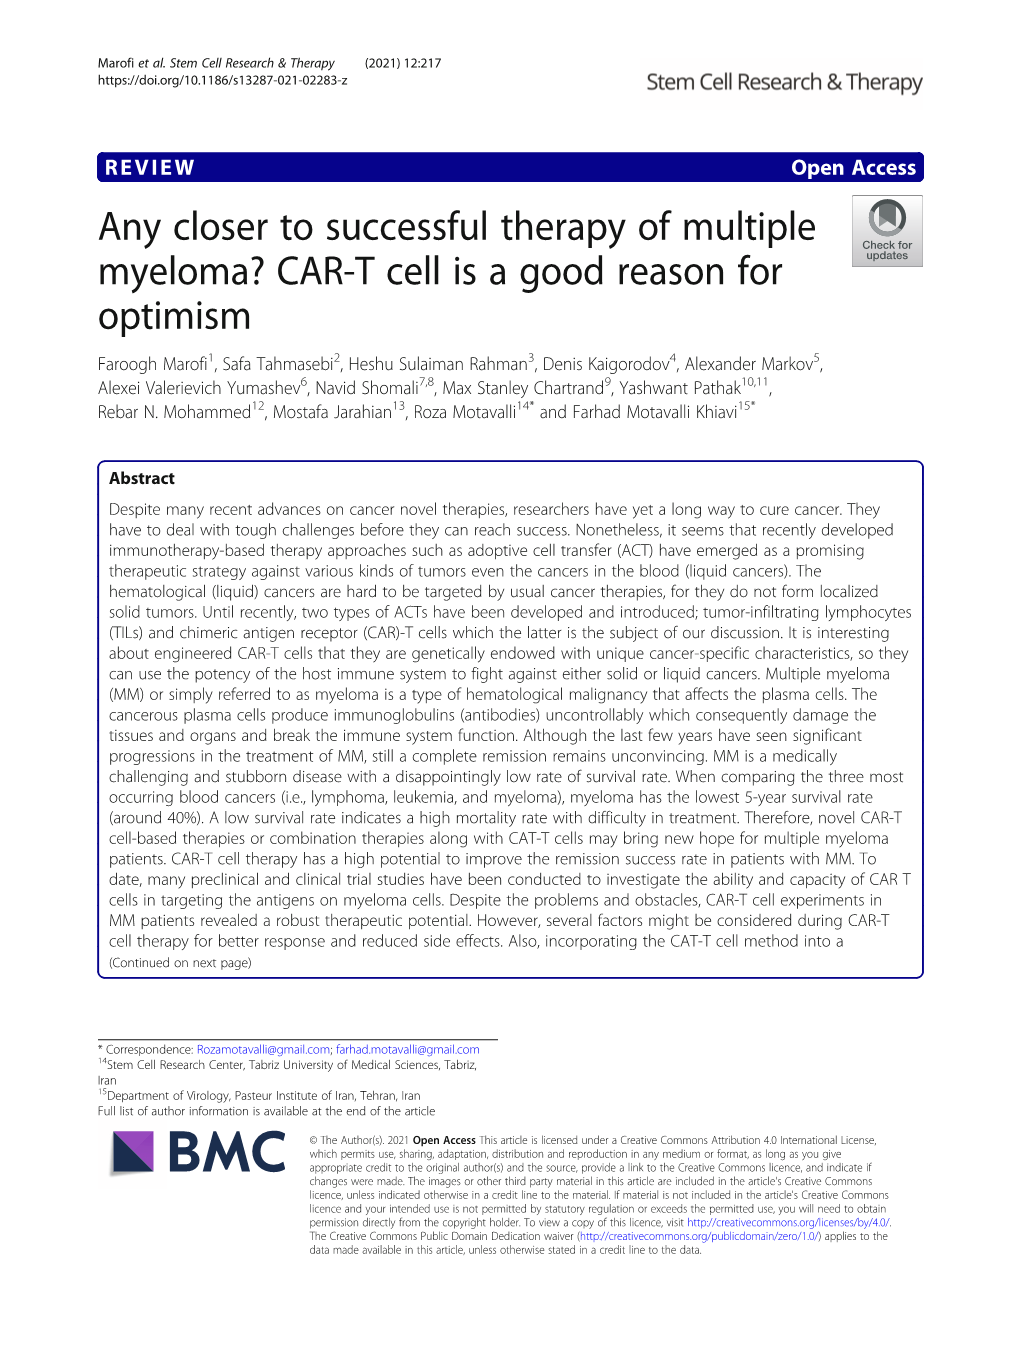 Any Closer to Successful Therapy of Multiple Myeloma? CAR-T Cell Is A